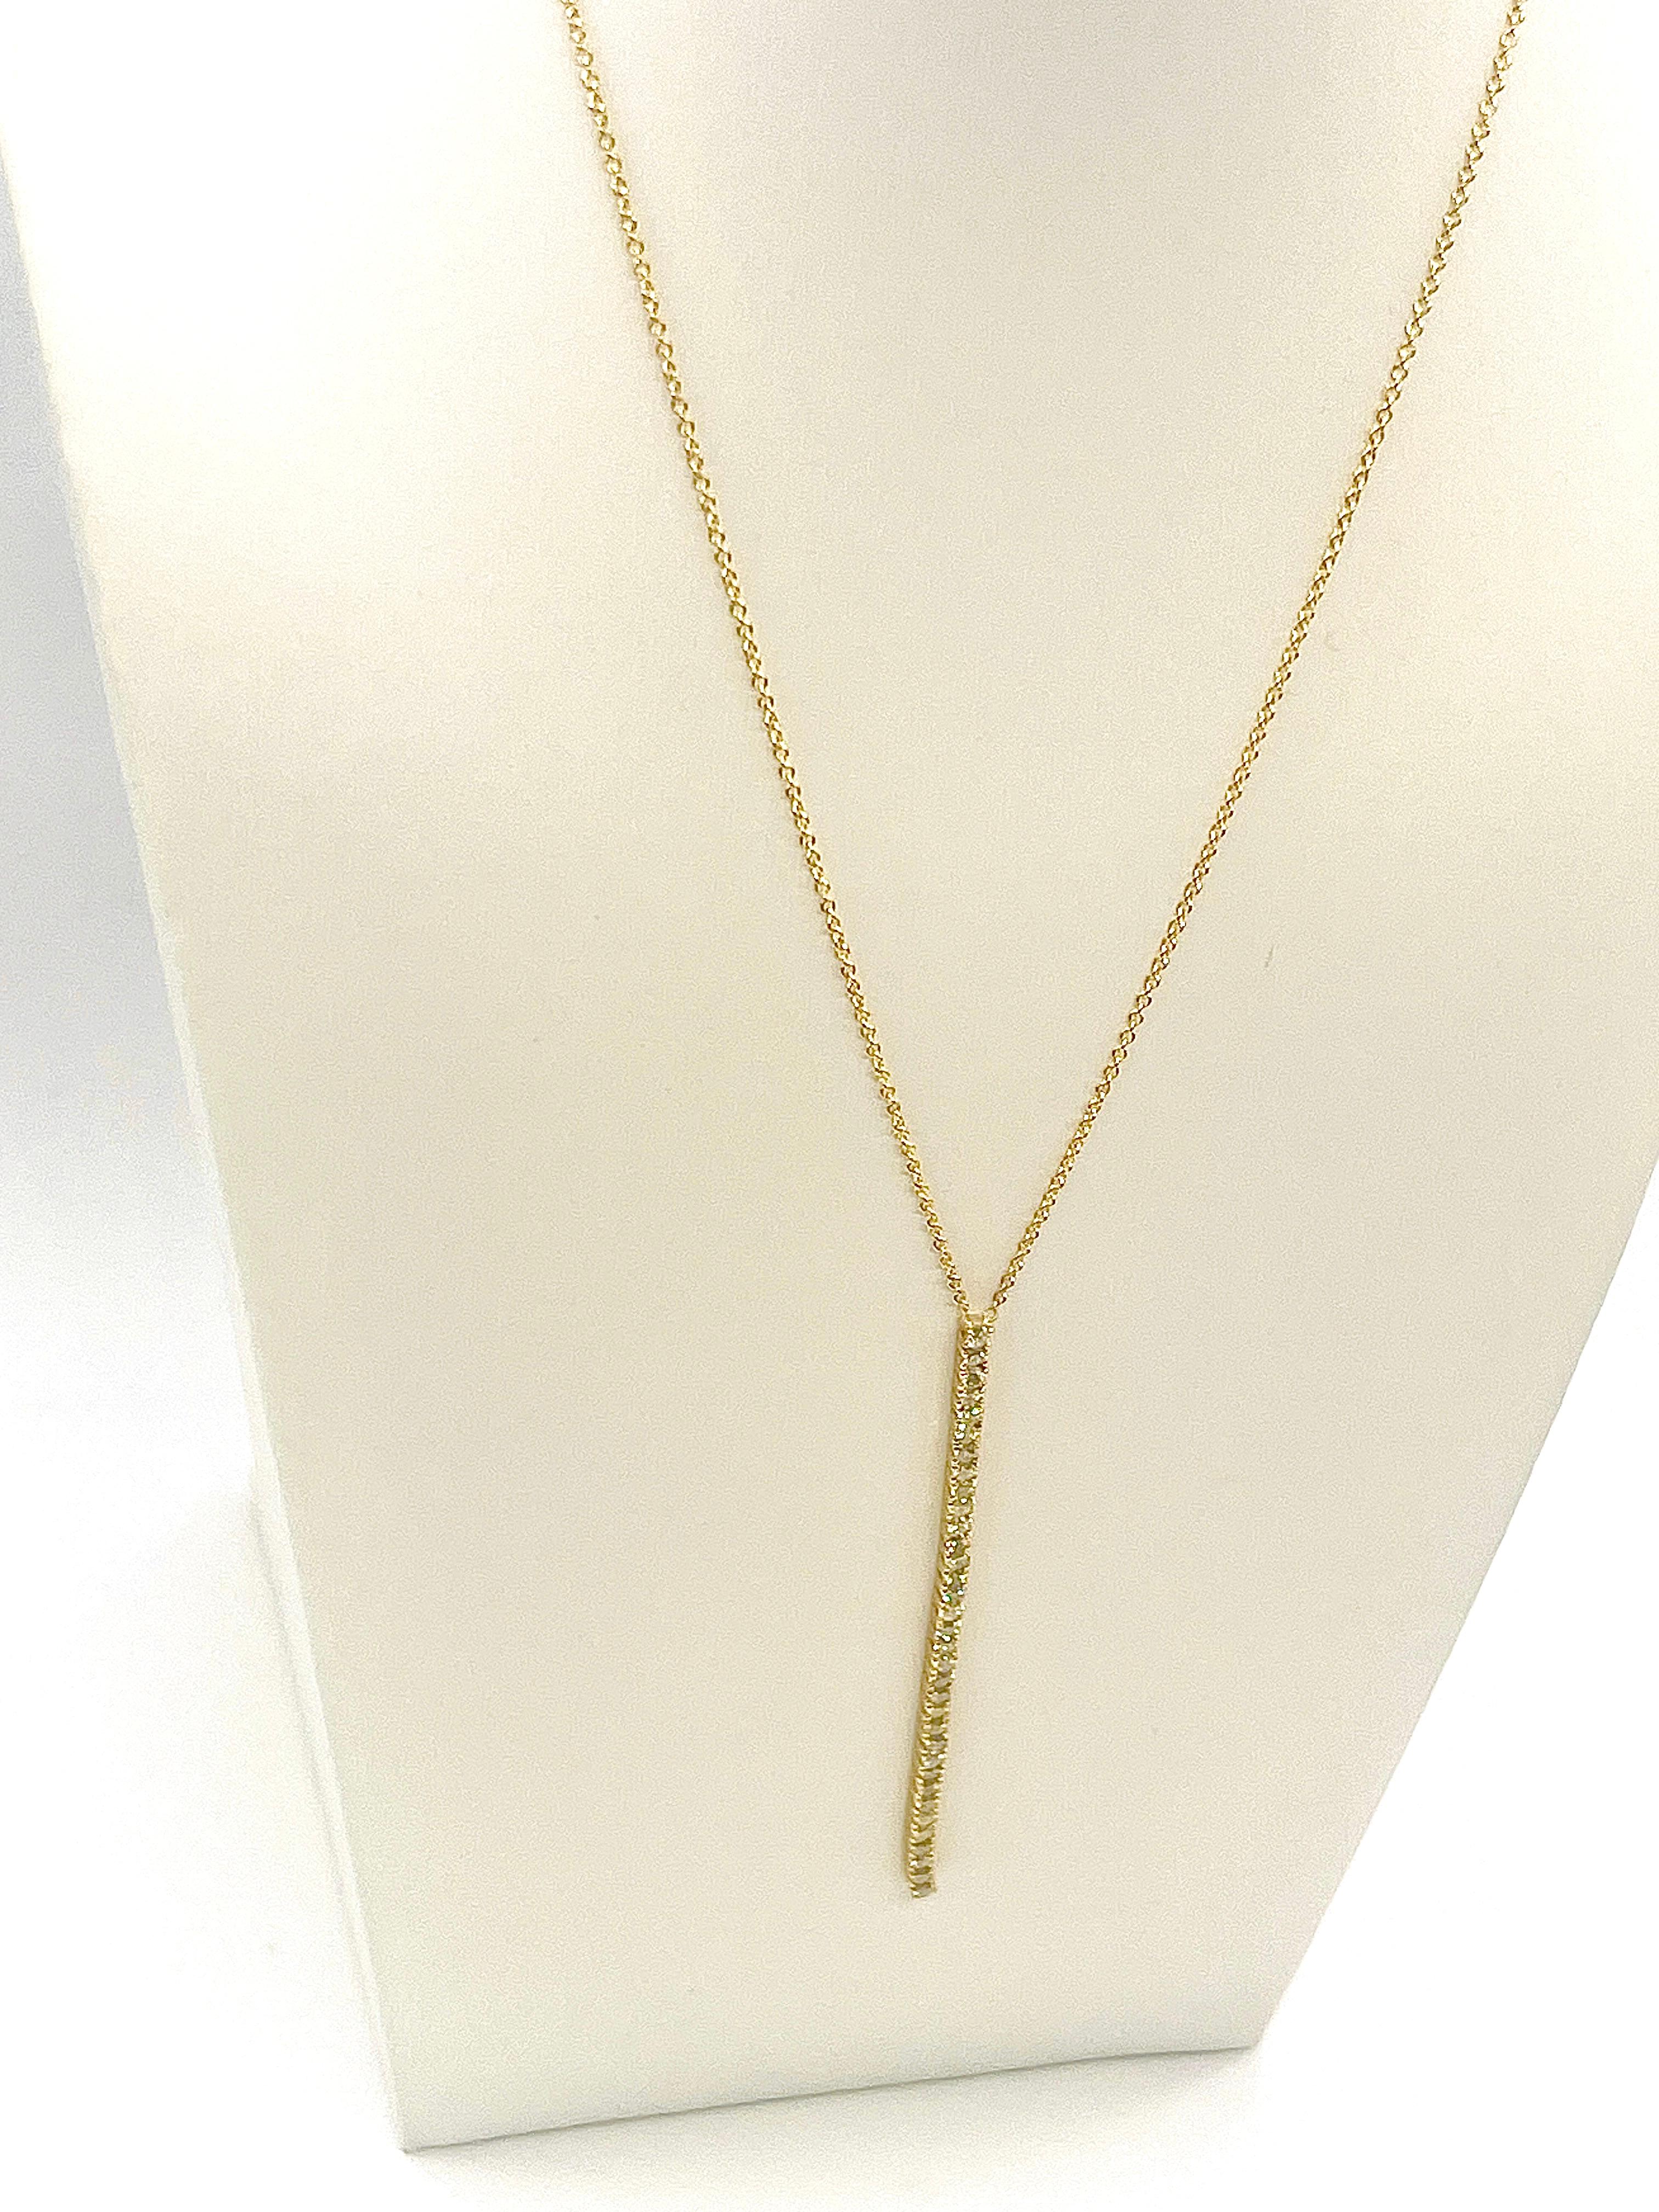 1.41 Carat All Natural Diamond Tennis Drop Necklace in 14K Yellow Gold For Sale 3